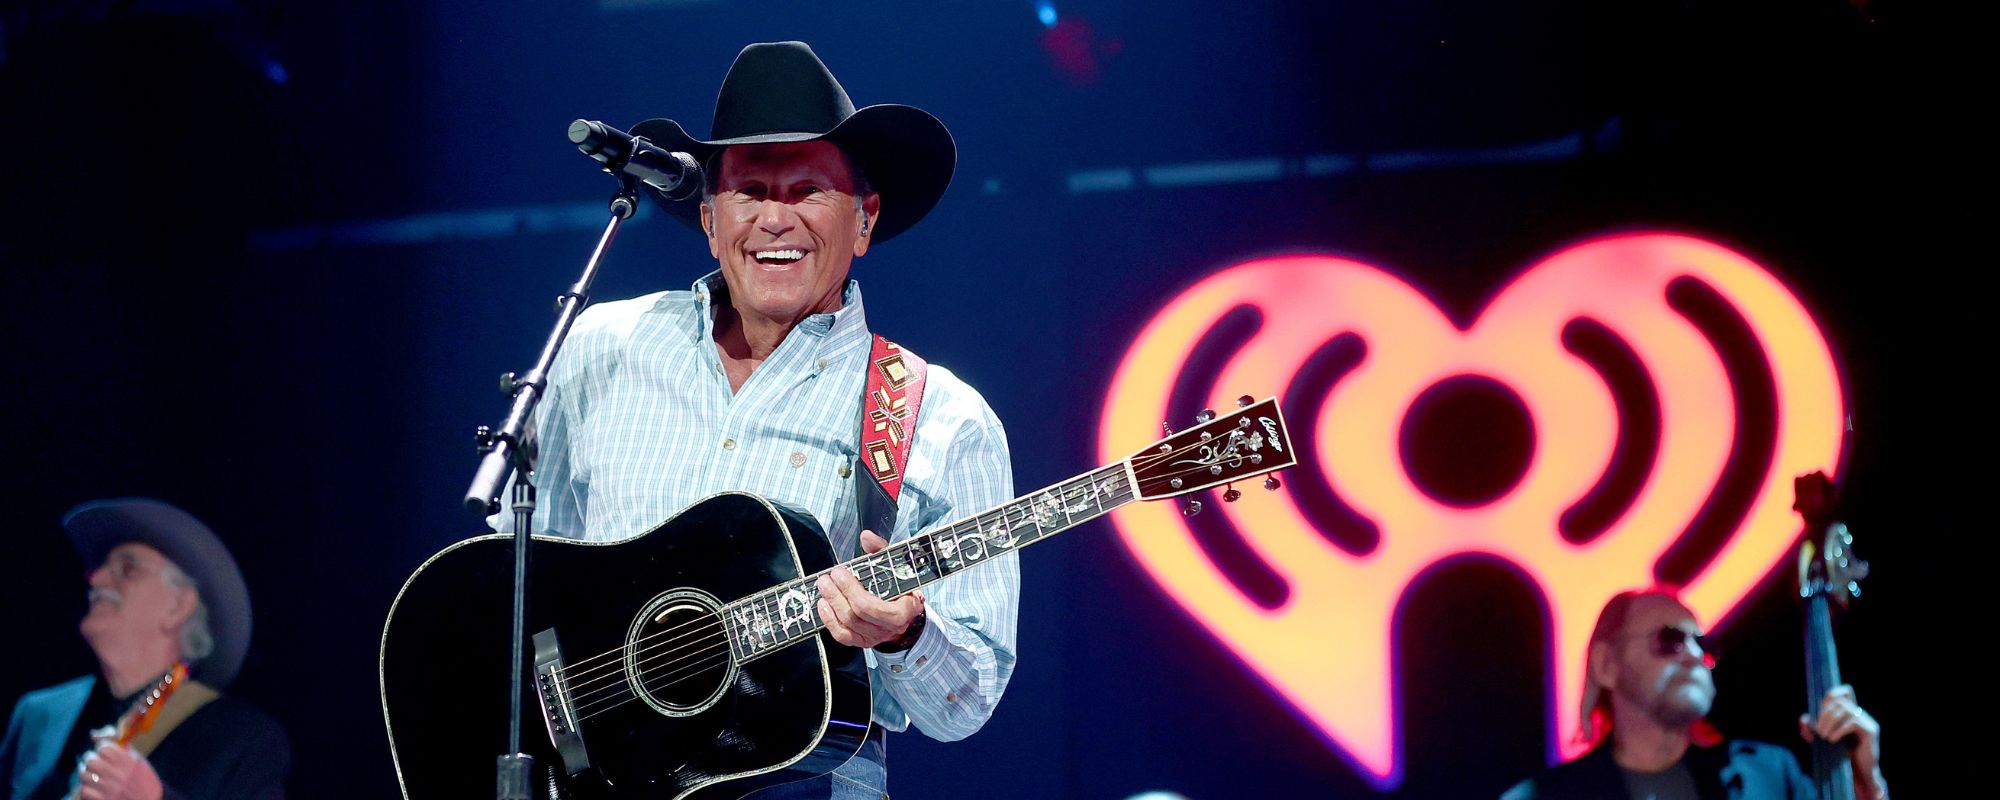 Erv Woolsey Death & Obituary, George Strait's Manager Has Passed